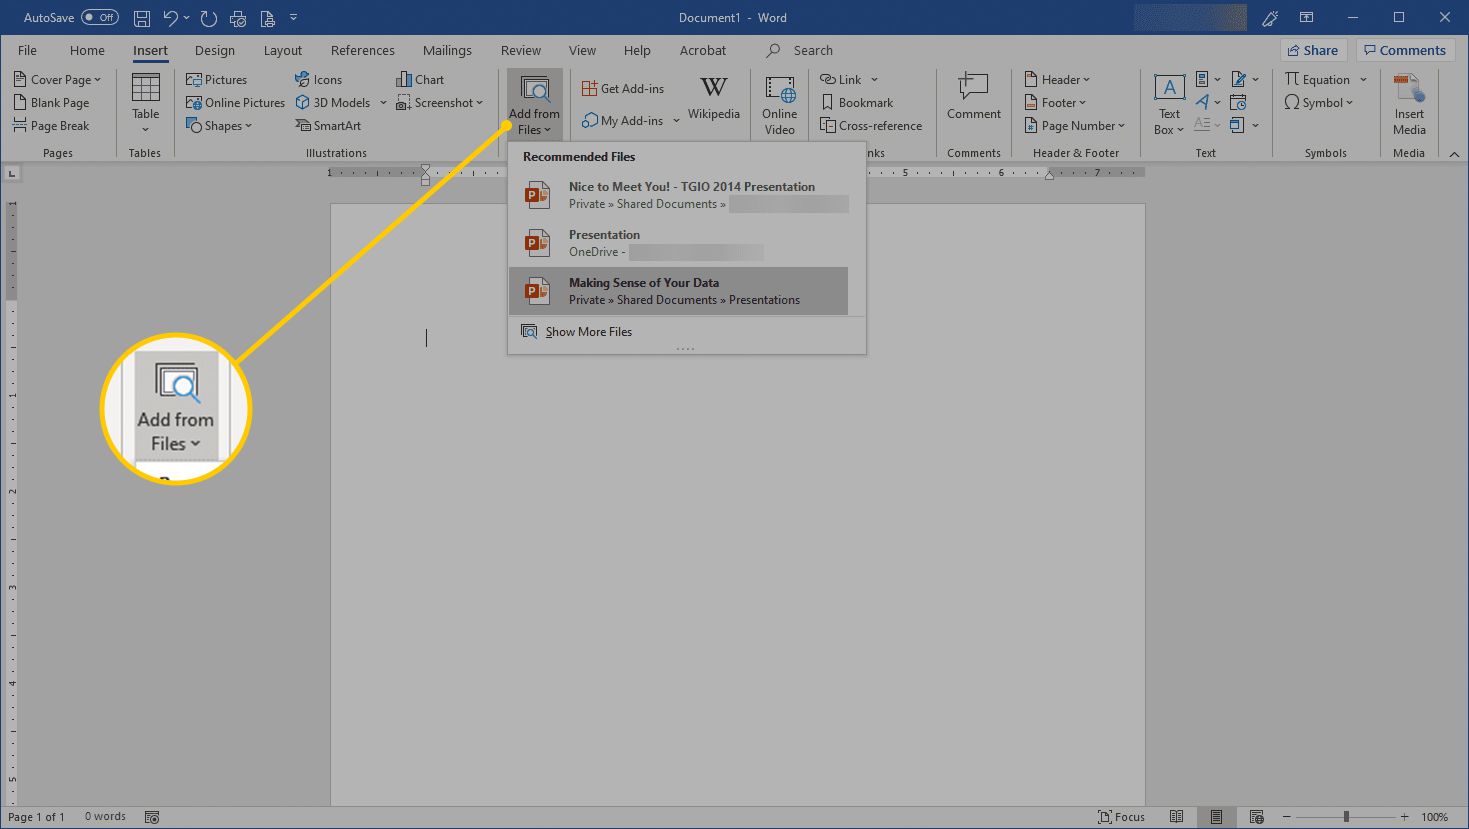 How to Insert Powerpoint Slides Into Word?